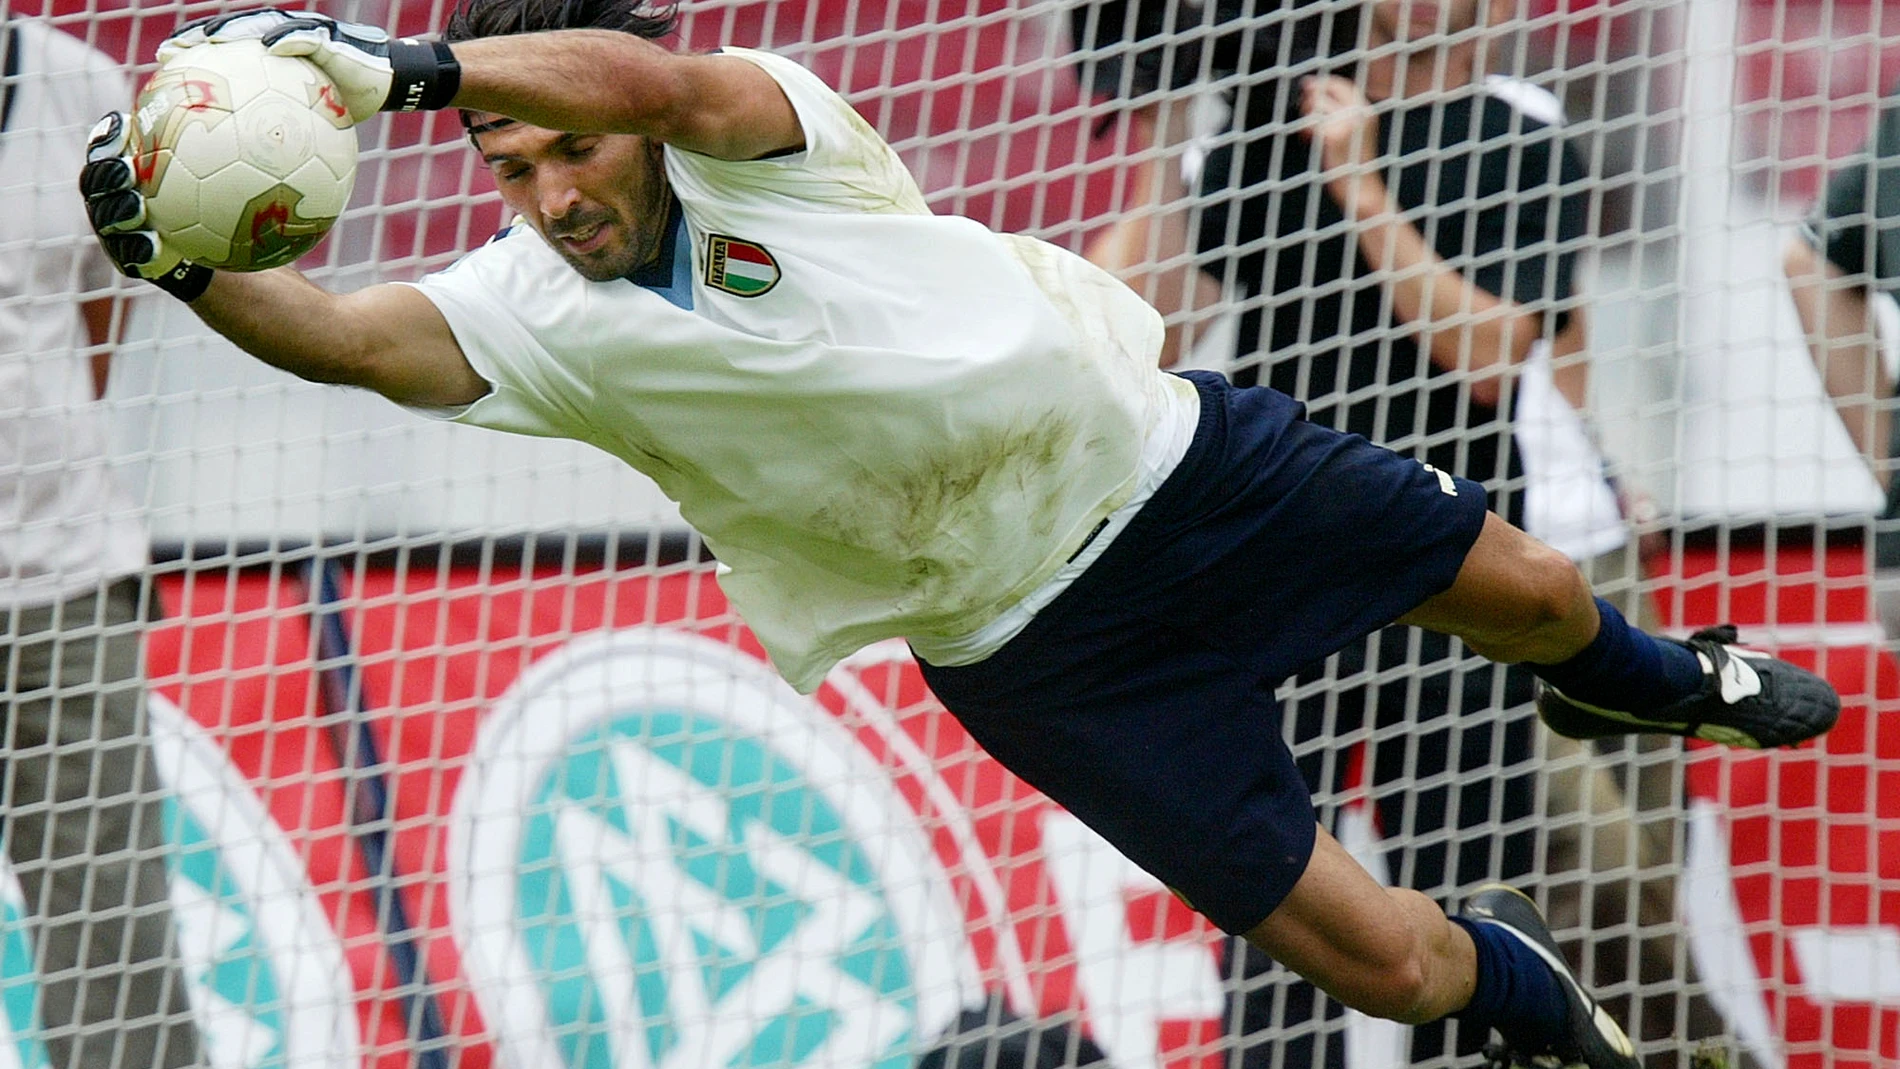 FILE - Gianluigi Buffon, goalkeeper of the Italian national soccer team, stretches for a ball during to the first training in Stuttgart, southern Germany, on Aug. 19, 2003. At age 45 and after a career that included a World Cup title with Italy, a long list of trophies with Juventus and many years when he was considered among the best goalkeepers in soccer, Gianluigi Buffon announced his retirement on Wednesday, Aug. 2, 2023. (AP Photo/Daniel Maurer)